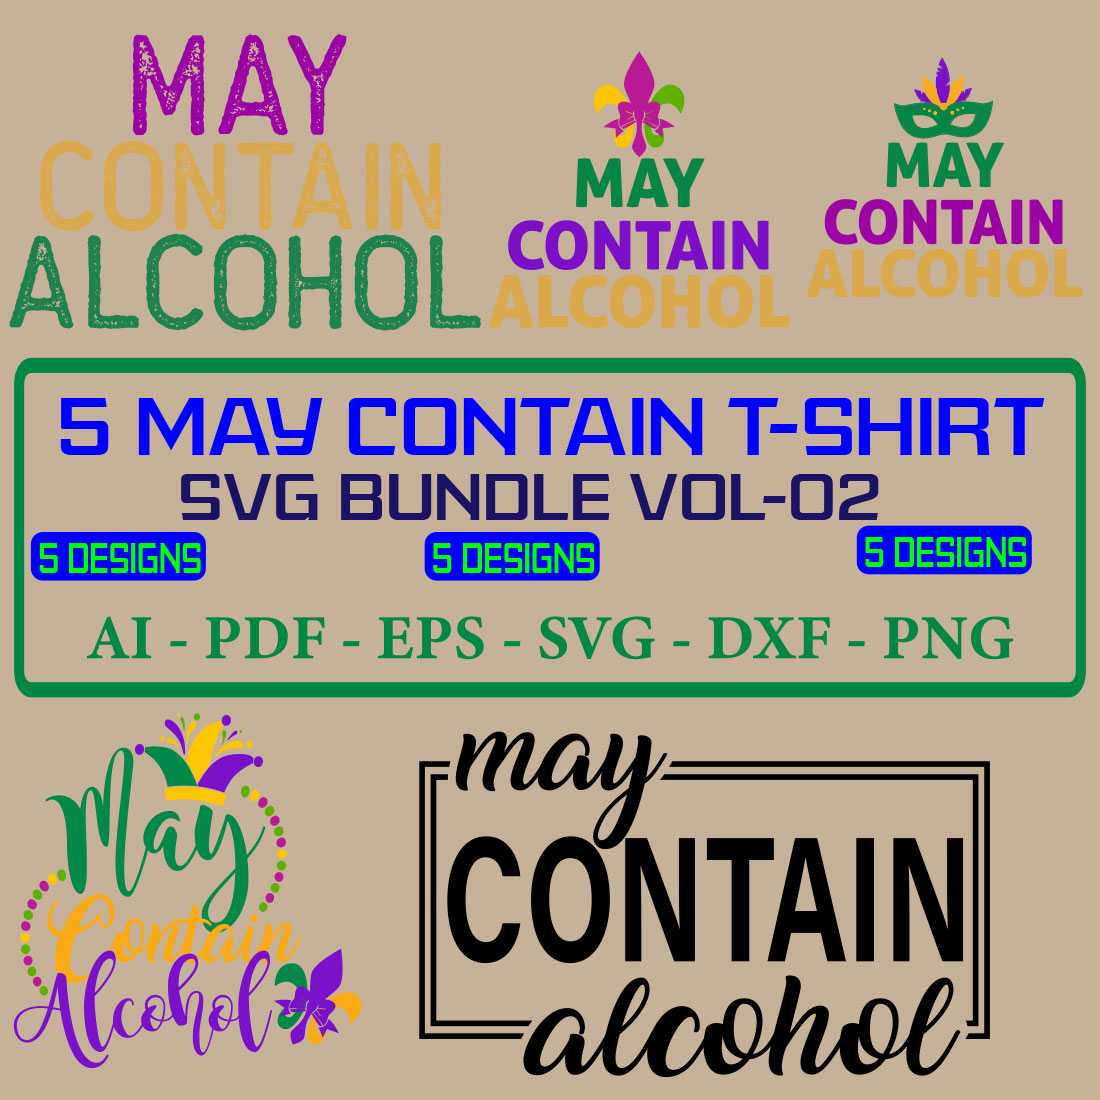 5 May Contain SVG Bundle Vol 02 cover image.